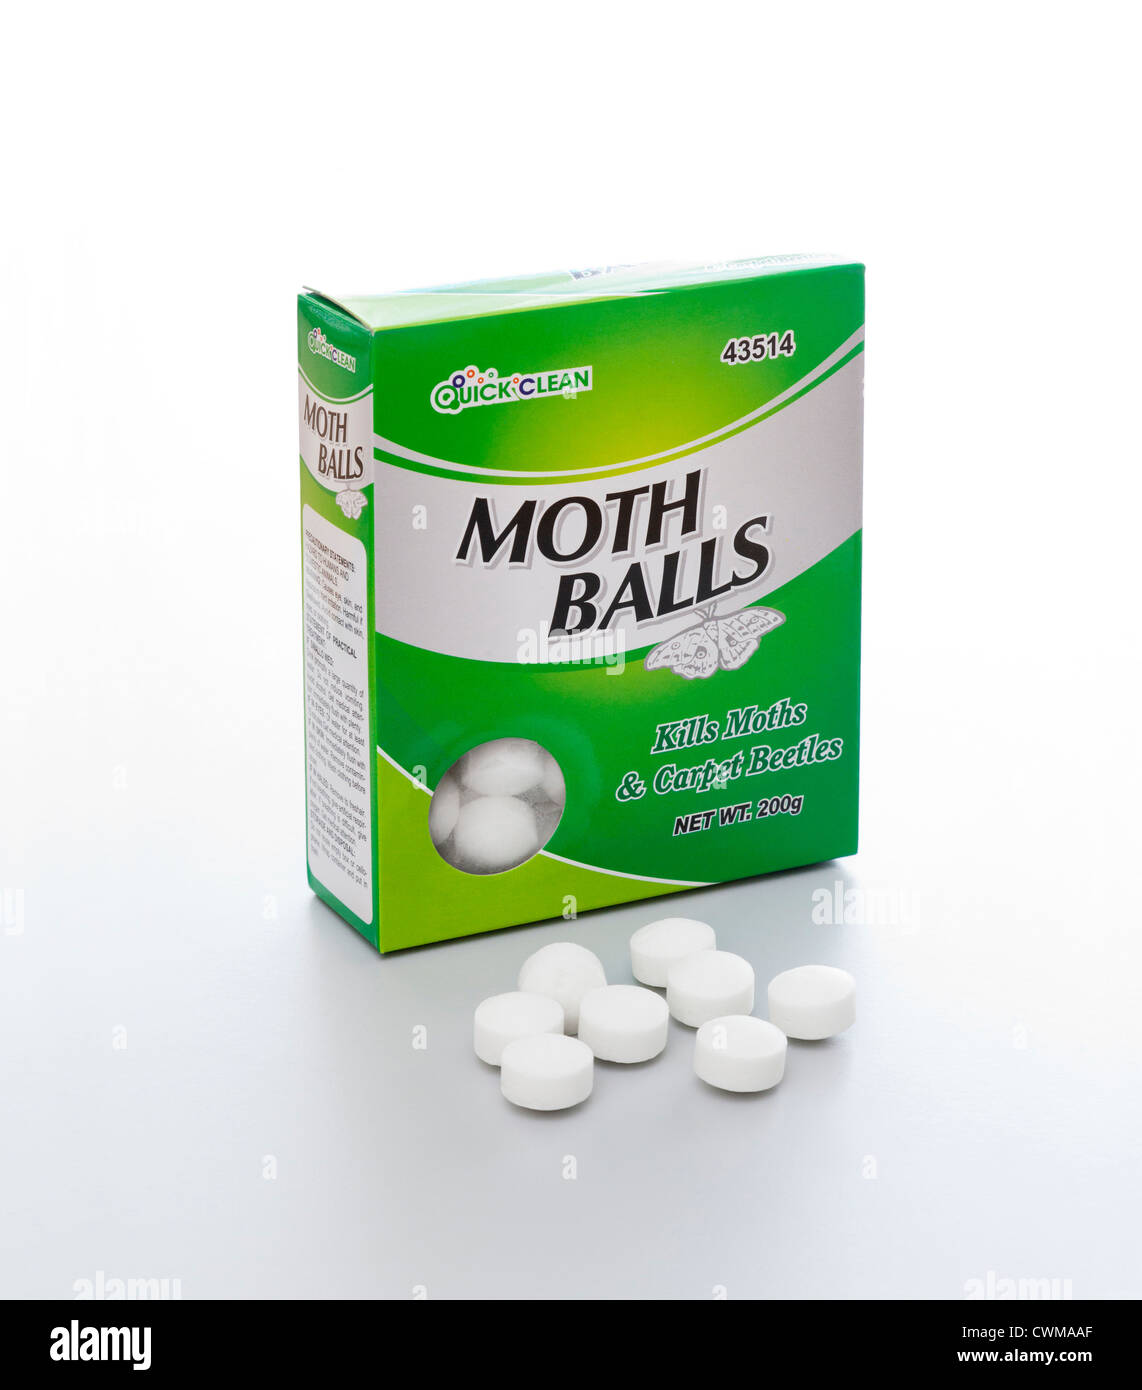 What is in moth balls?